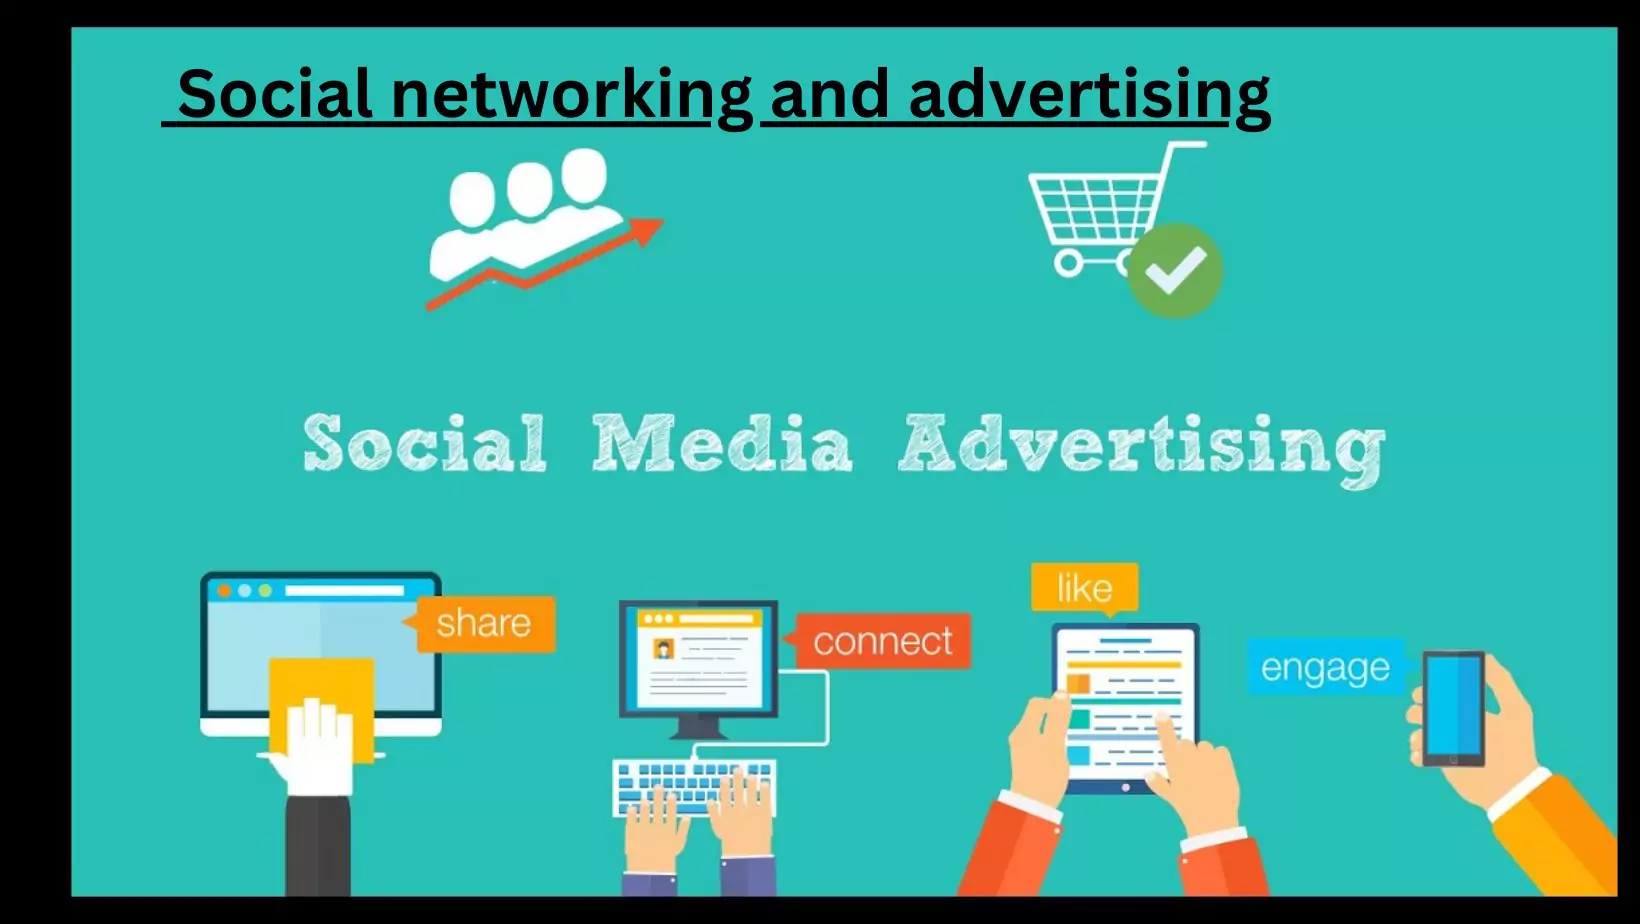 Social networking and advertising